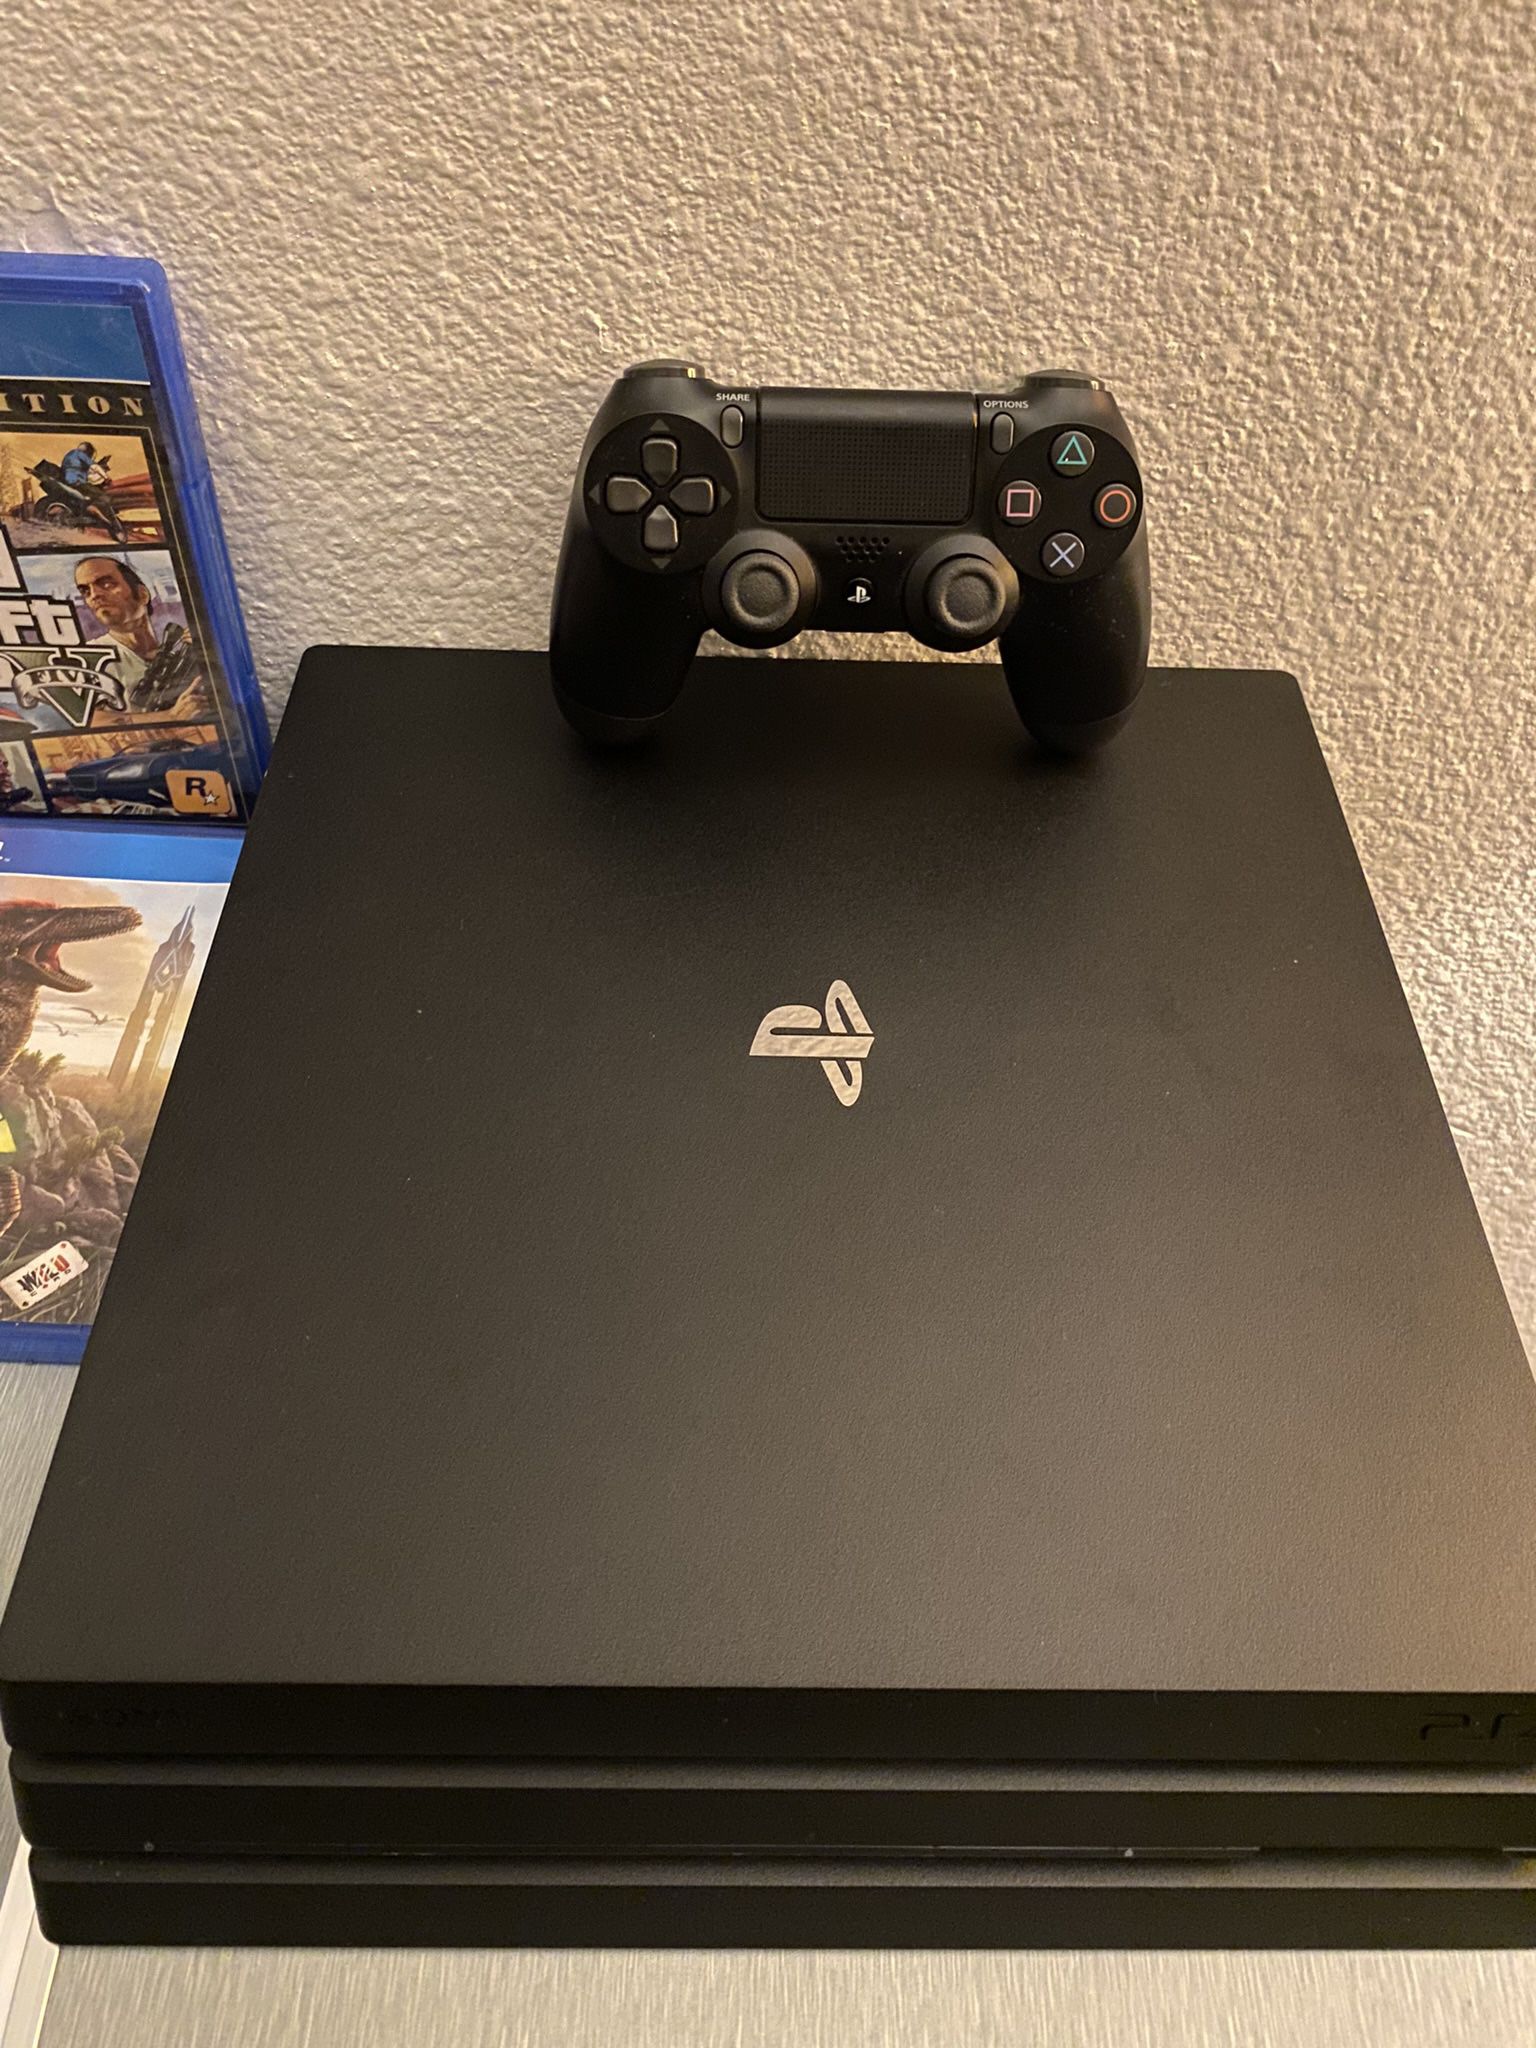 Sony PlayStation 4 Pro 1TB Console - Black (PS4 Pro) Sale in Orlando, FL OfferUp